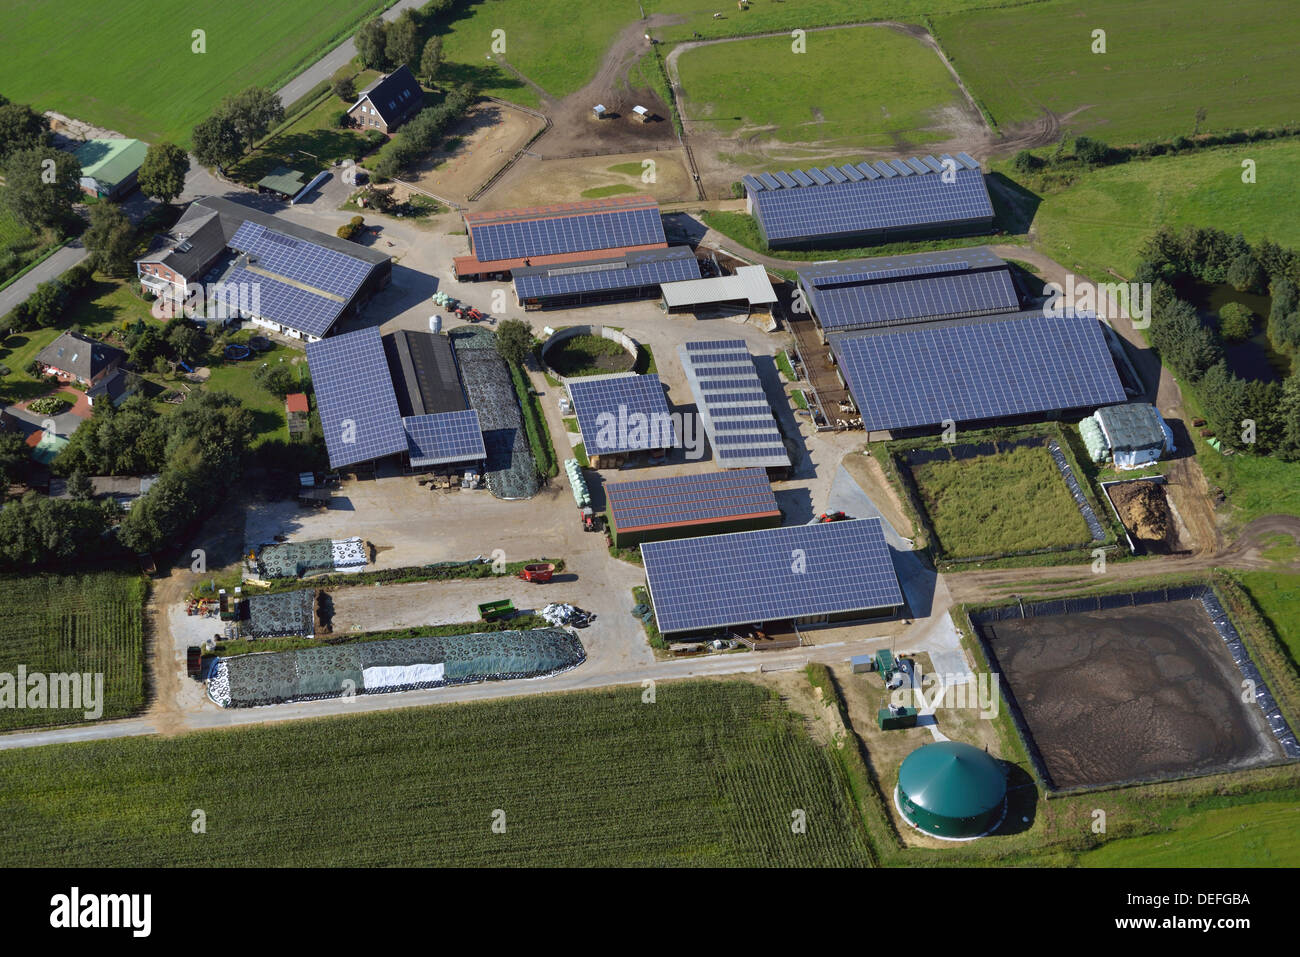 Farm with solar panels on the roofs, aerial view, Fischerhütte, Steenfeld, Schleswig-Holstein, Germany Stock Photo